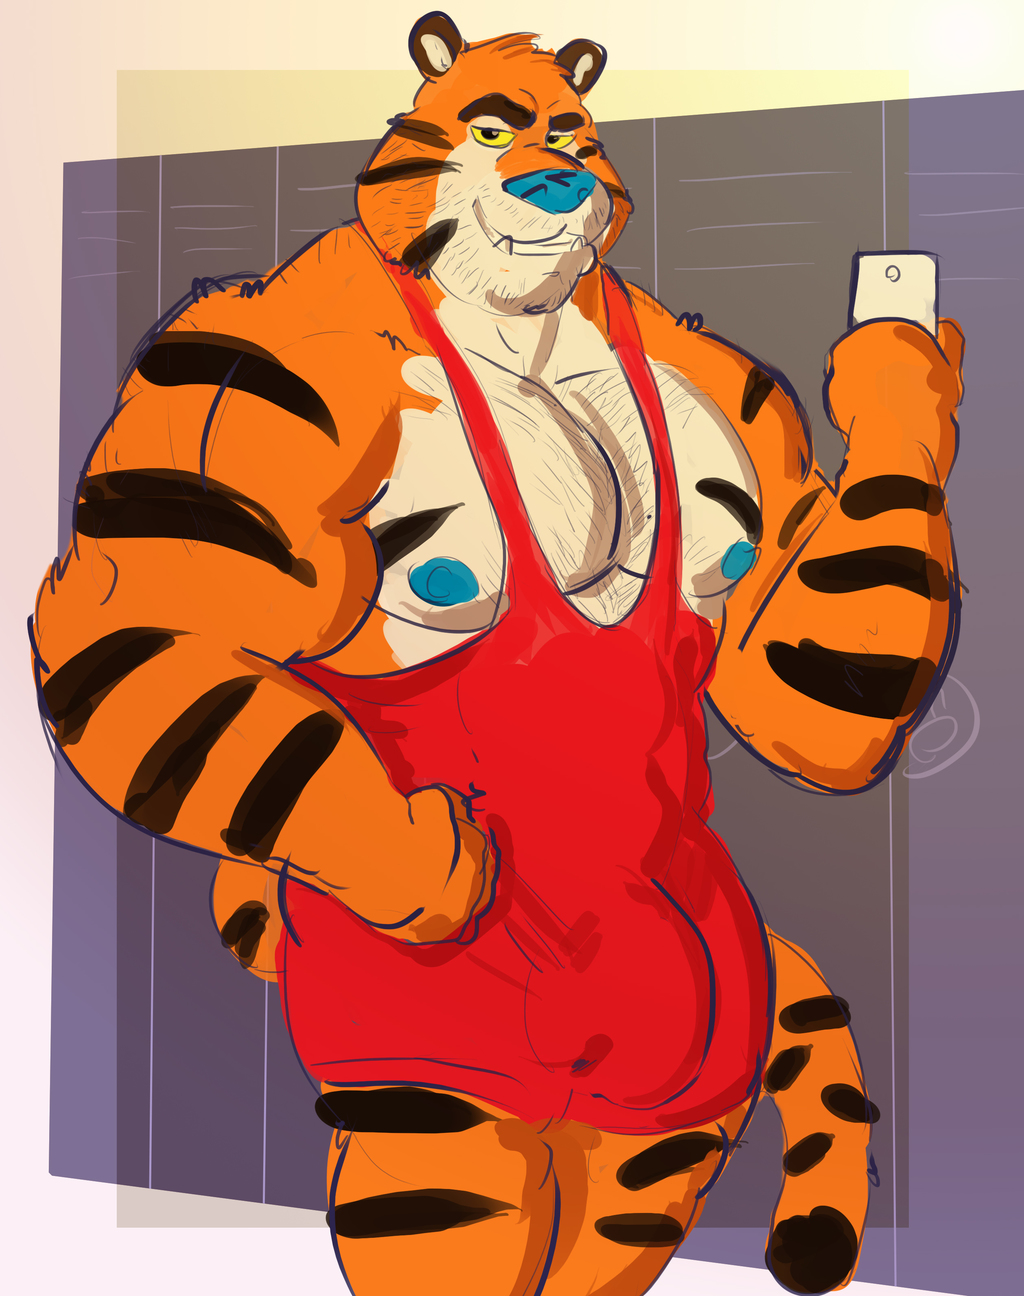 Fun Fact: As a kid I wanted to be Tony the Tiger, now that I am an adult, I...